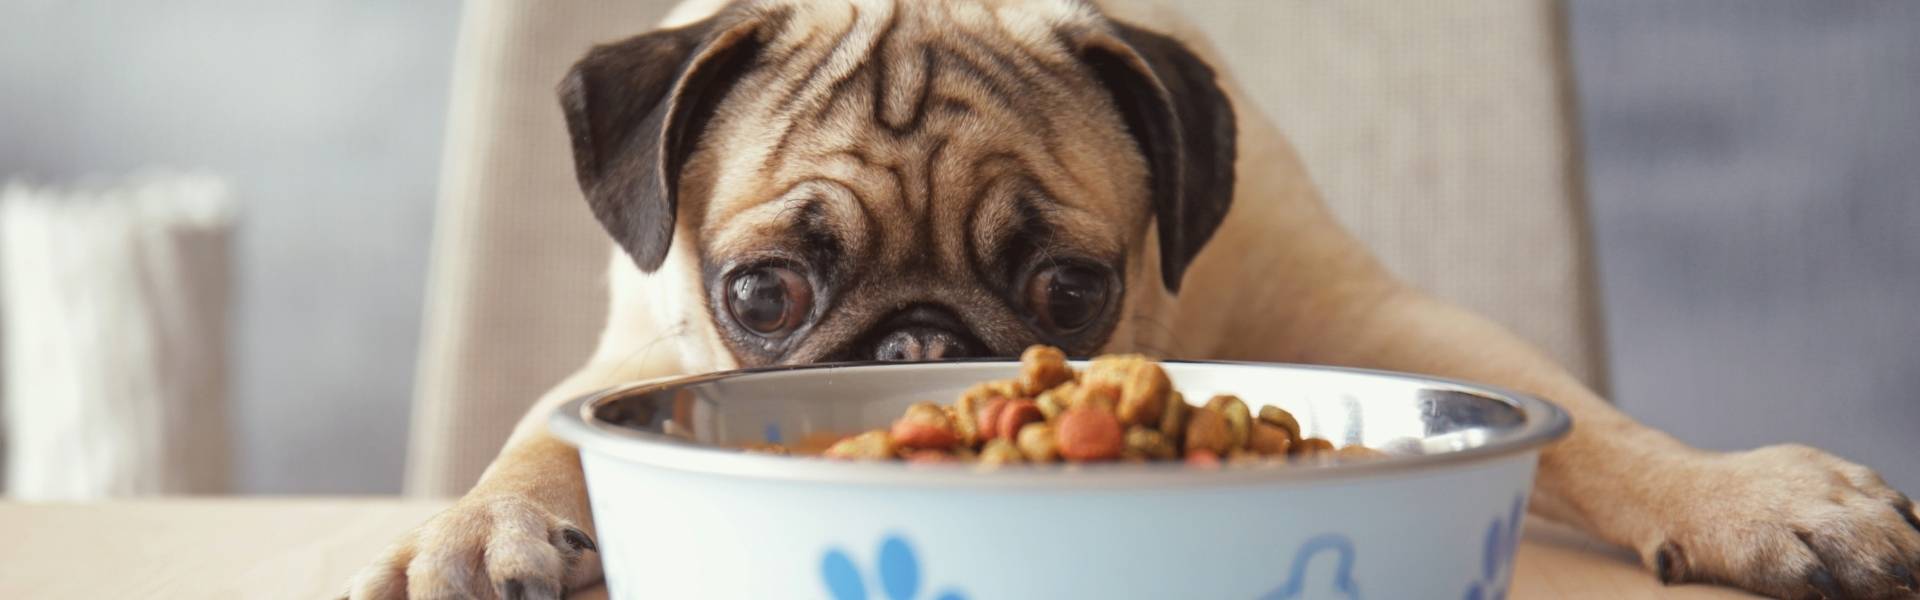 Dog eating habits: Which of these personalities is your pup?